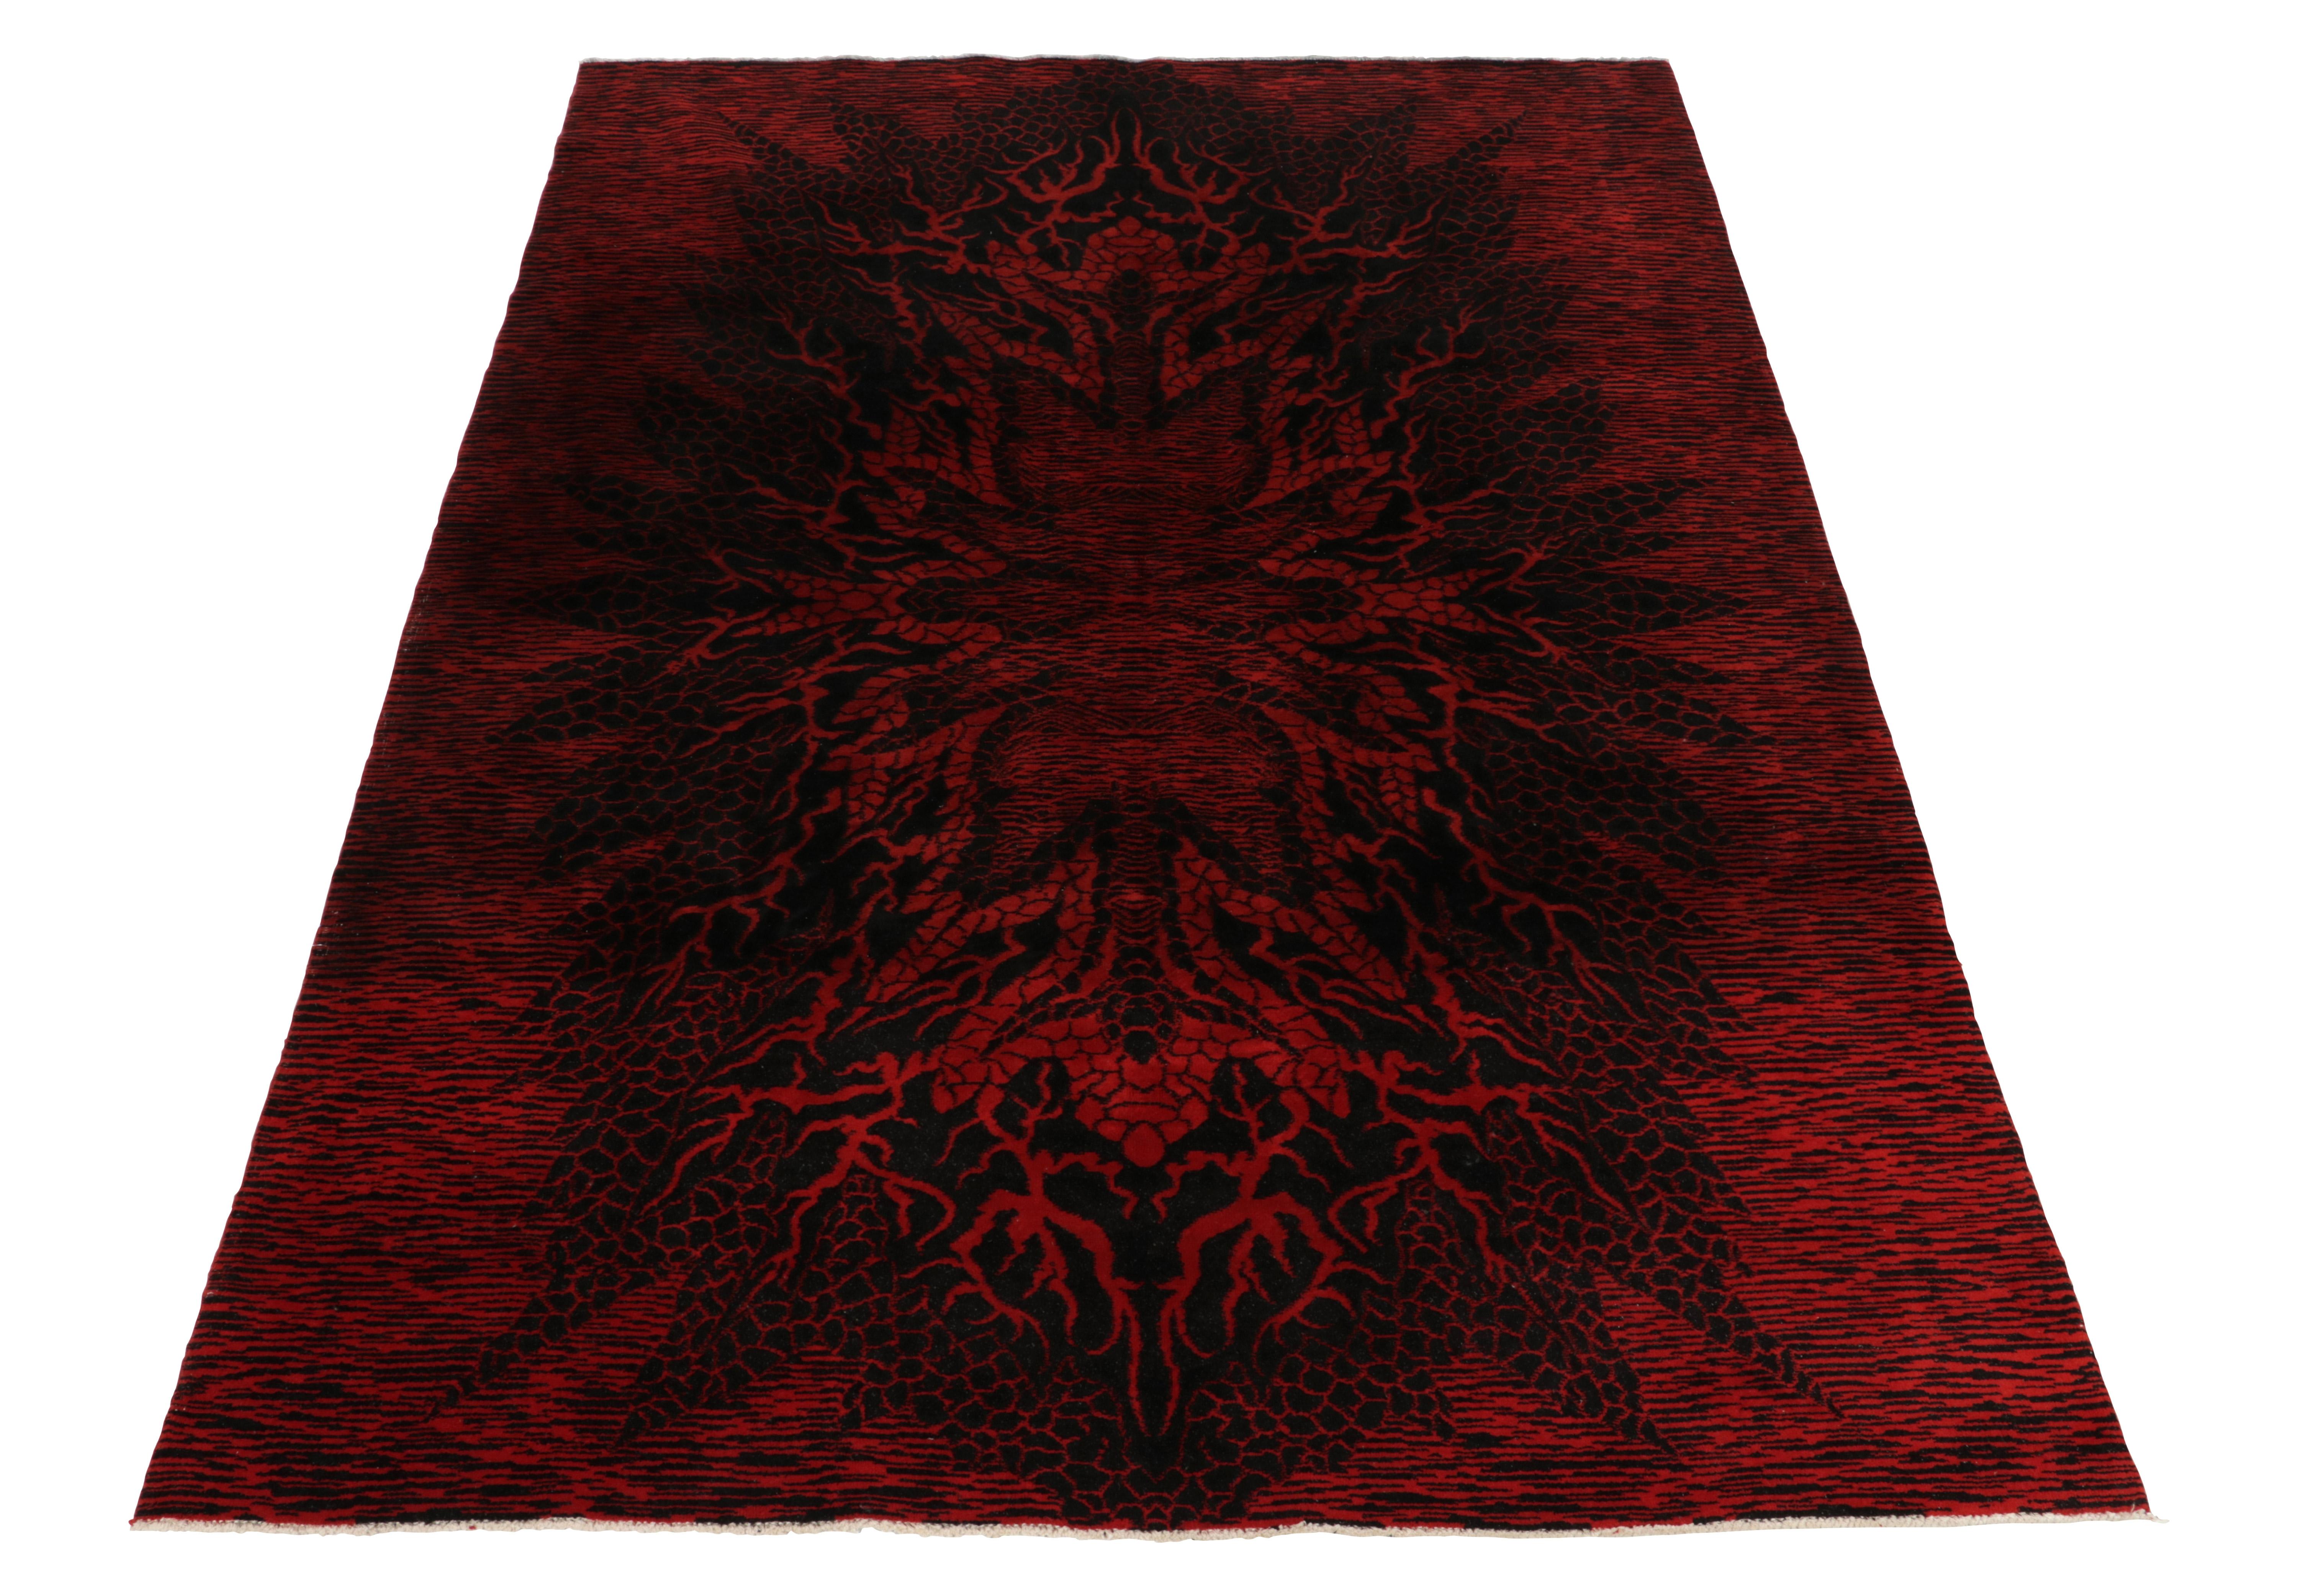 Hand-knotted in wool from Turkey circa 1960-1970, a vintage 7x10 distressed rug from an innovativeTurkish artist joining Rug & Kilim’s Mid-Century Pasha Collection. 

From the atelier’s rare, bold love affair with red and black, this rug